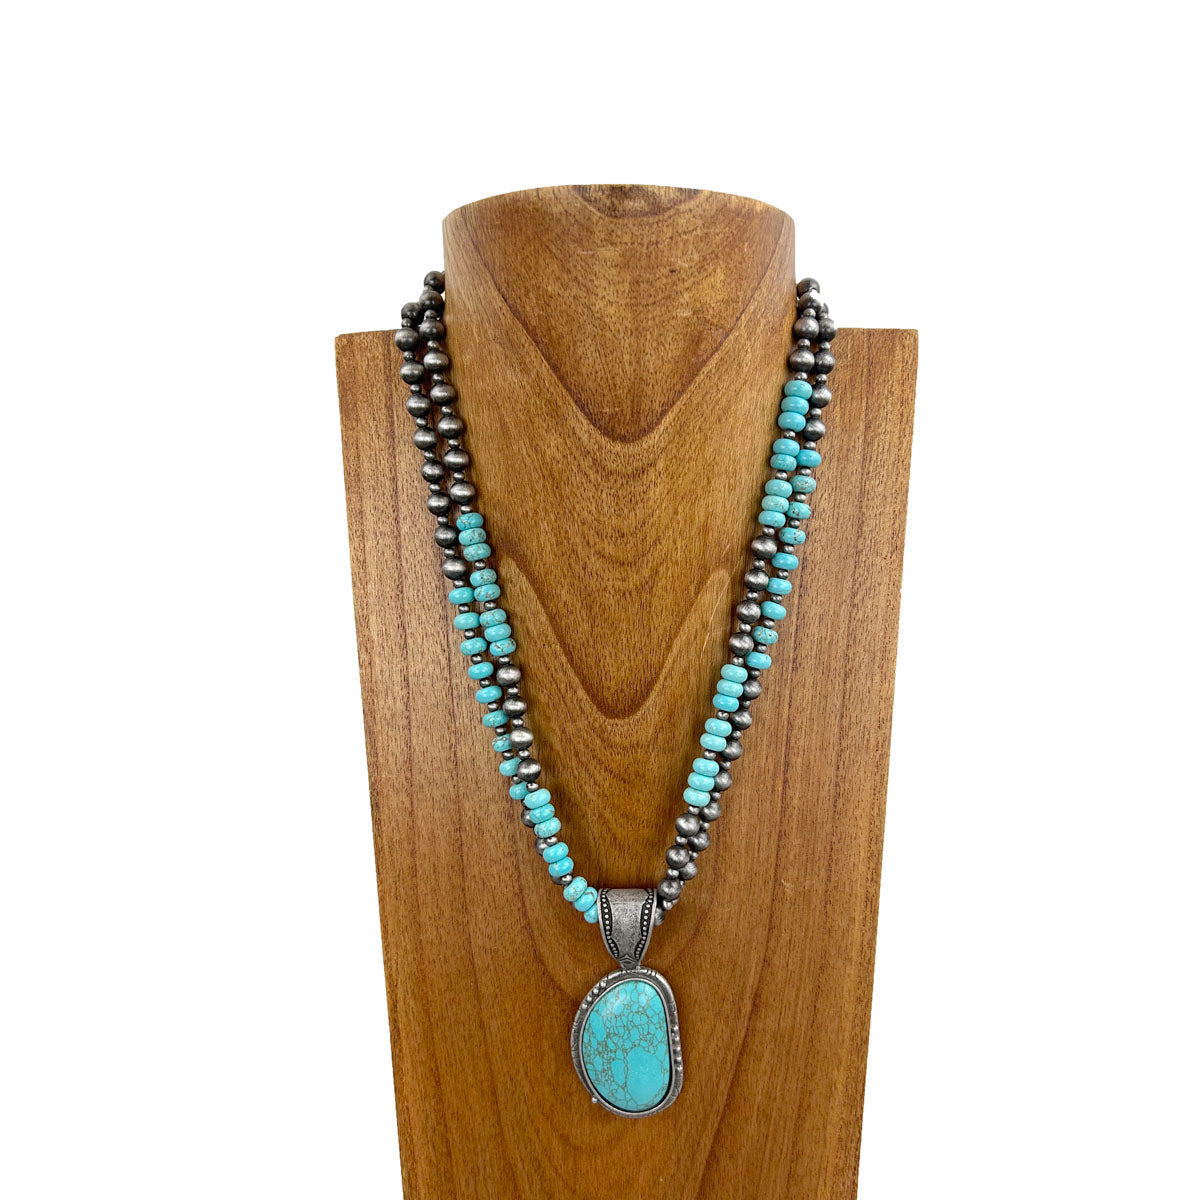 21 Inches double strings blue roundel turquoise stone and silver Navajo pearl bead with blue turquoise stone pendent Necklace